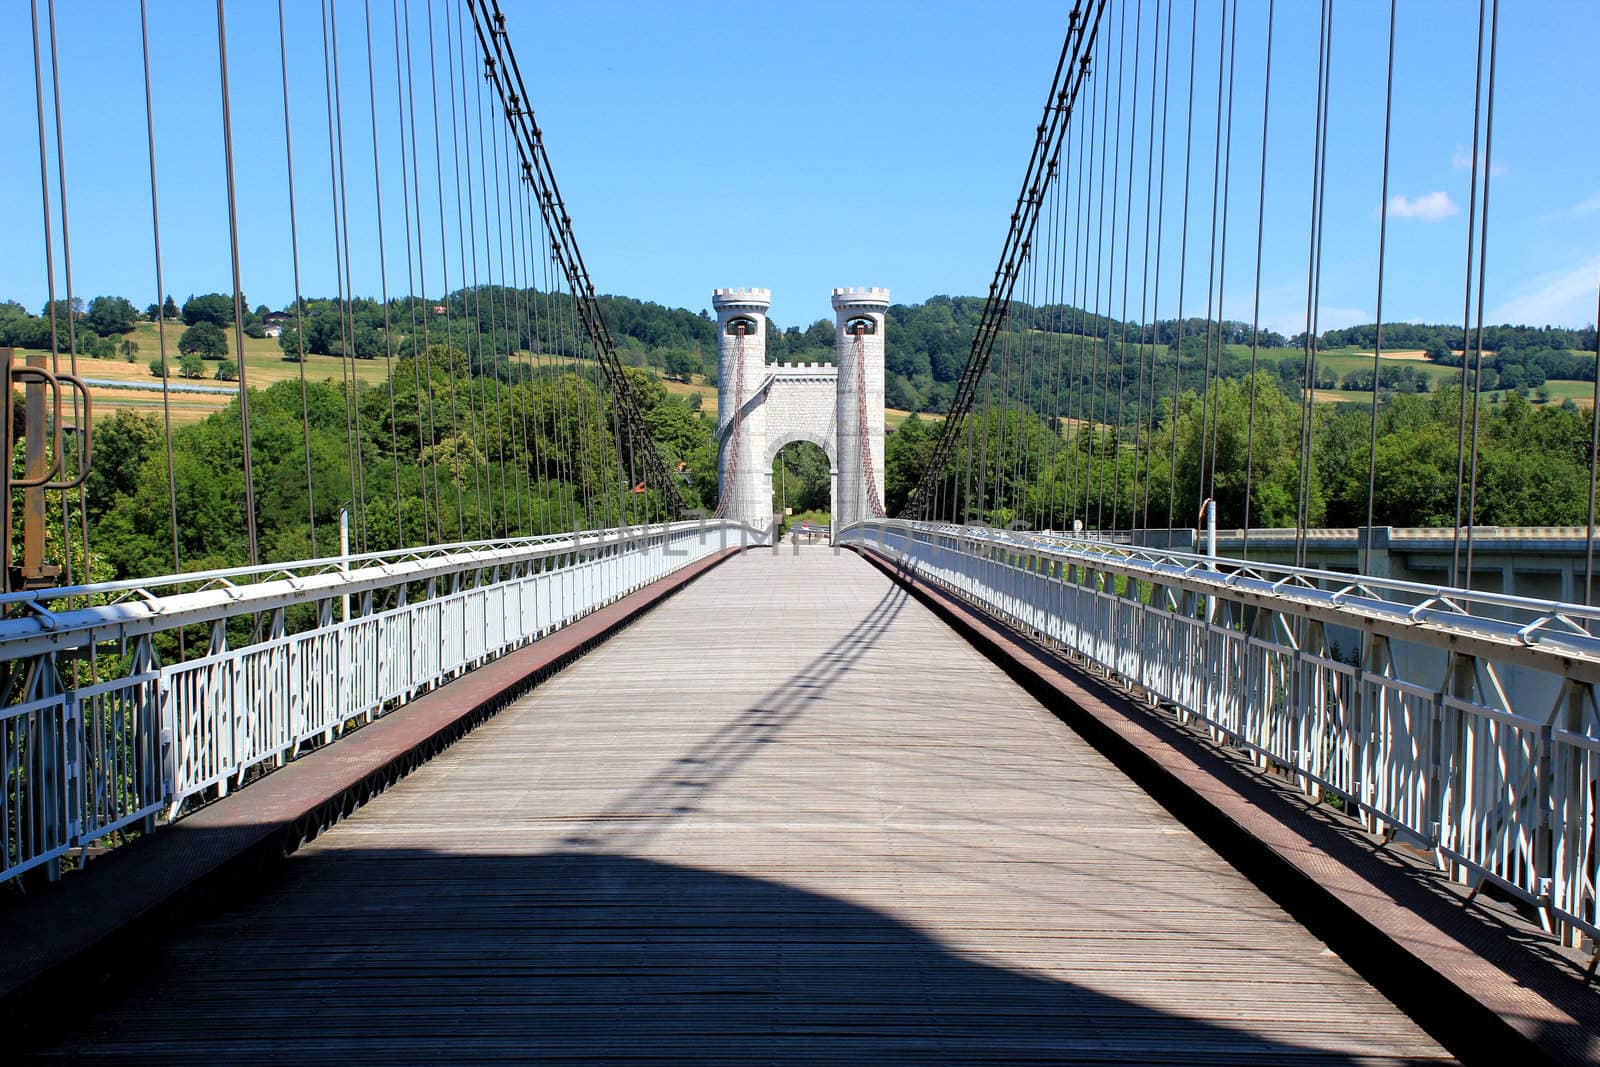 Suspended old bridge of the Caille, France, with its two towers